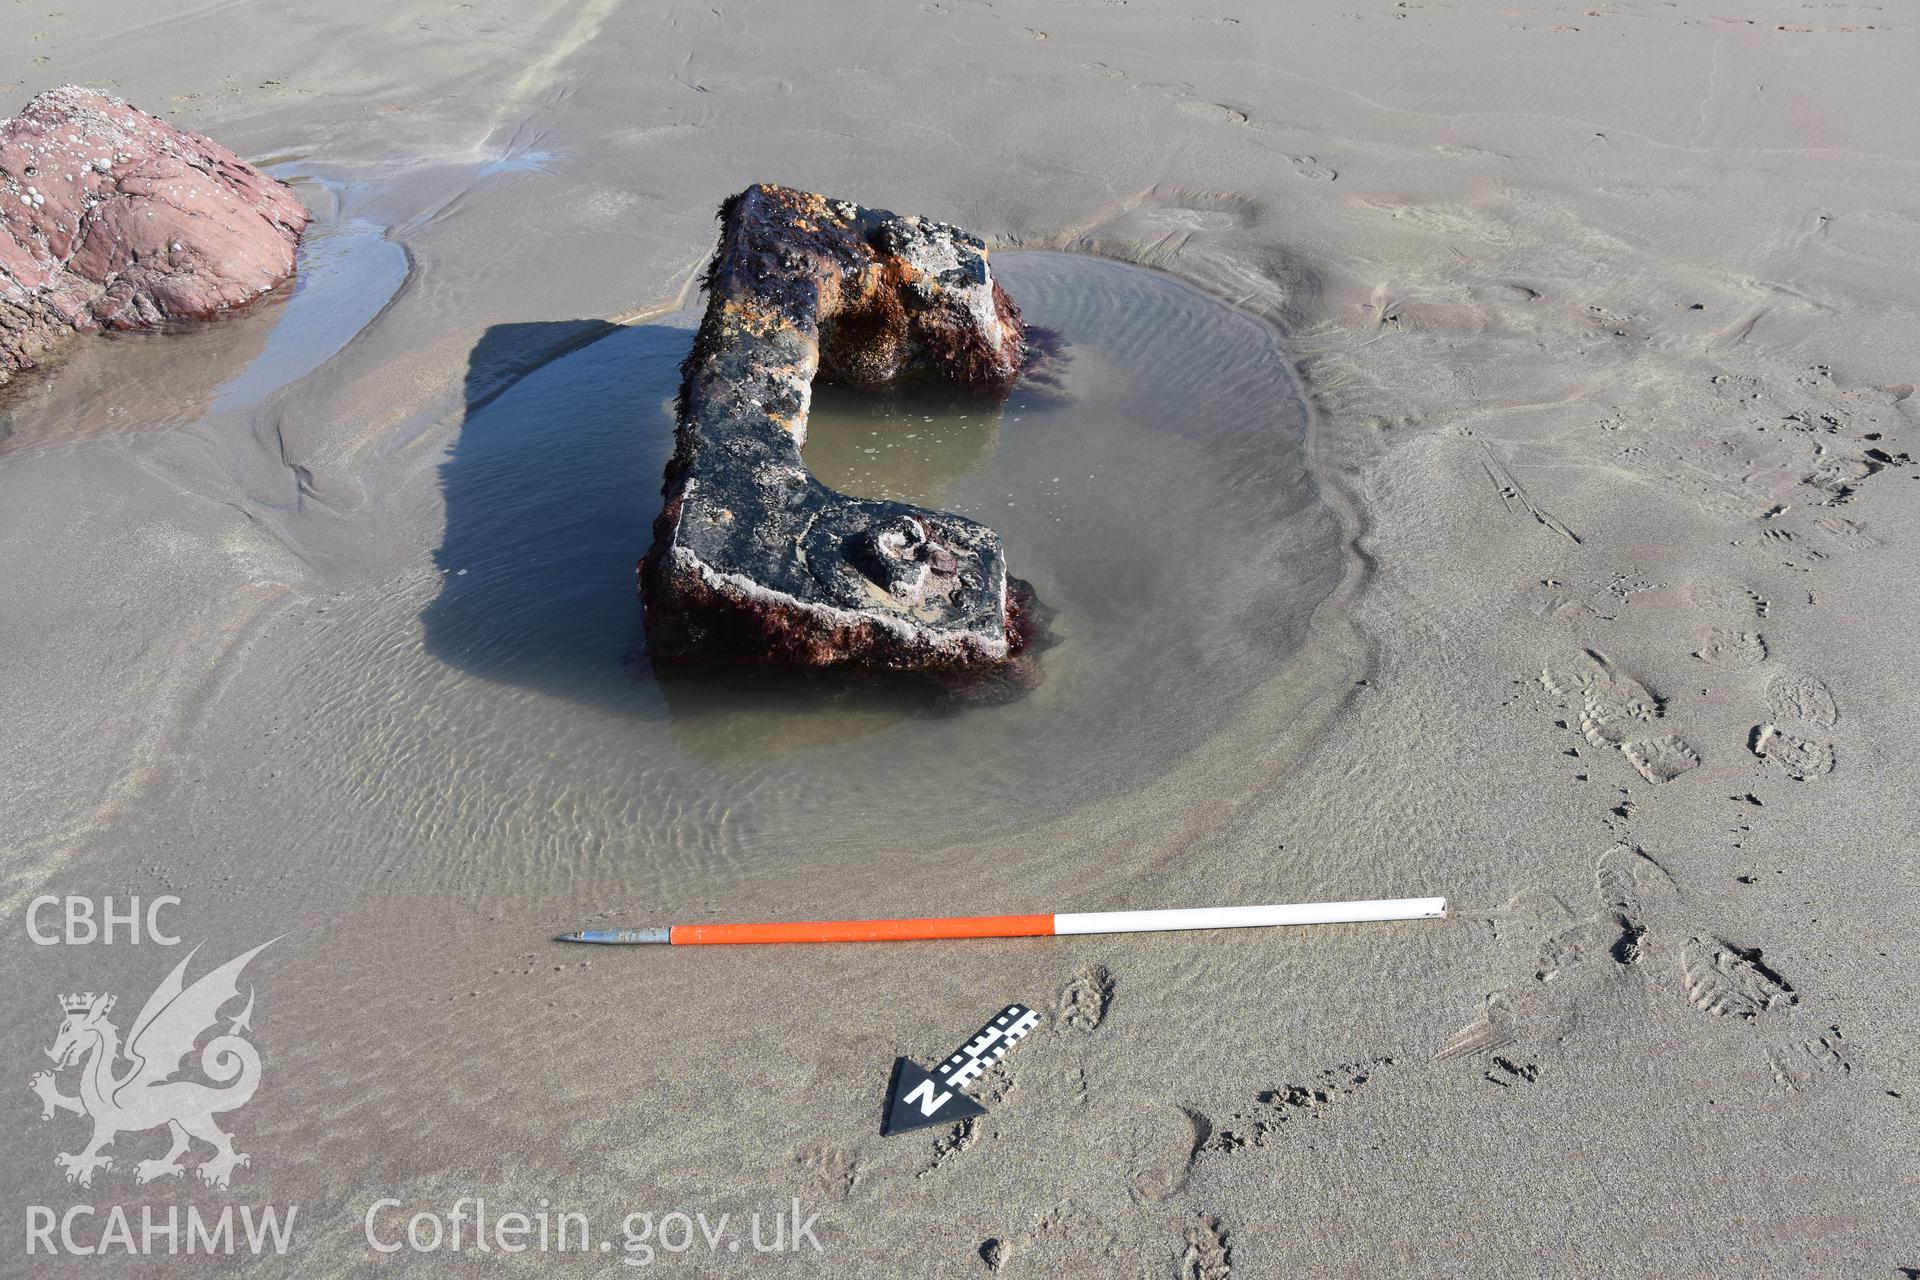 Element of the wreck exposed on the sand with 1m scale Taken by Daniel Hunt. Produced with EU funds through the Ireland Wales Co-operation Programme 2014-2023. All material made freely available through the Open Government Licence.